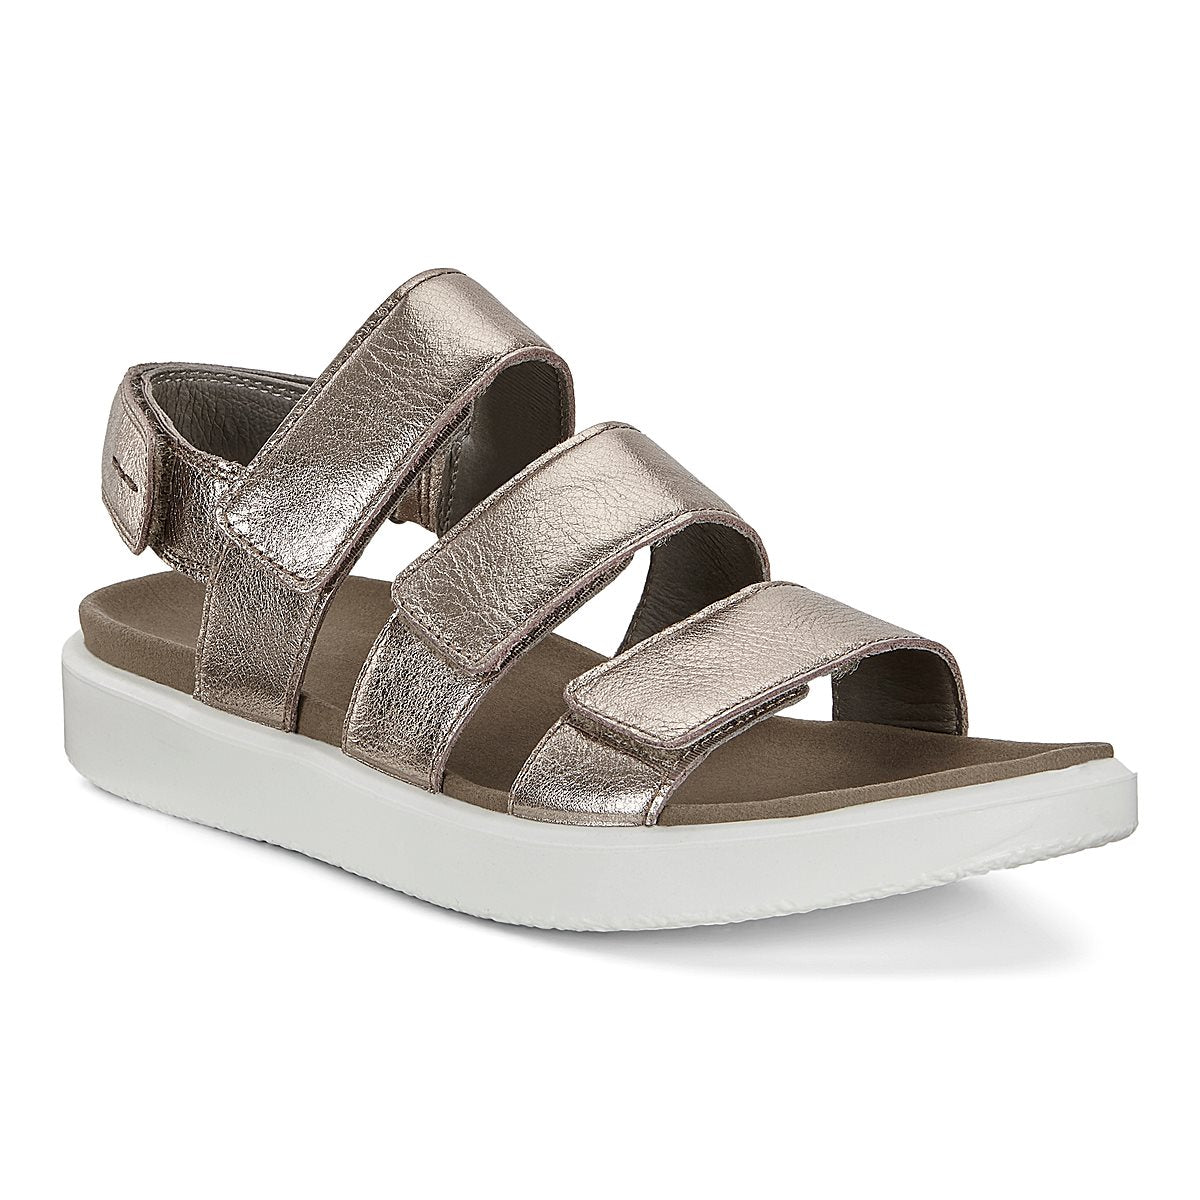 Ecco 273633 Warm Grey Metallic Leather Hook and Loop Strap Sandals - elevate your sole